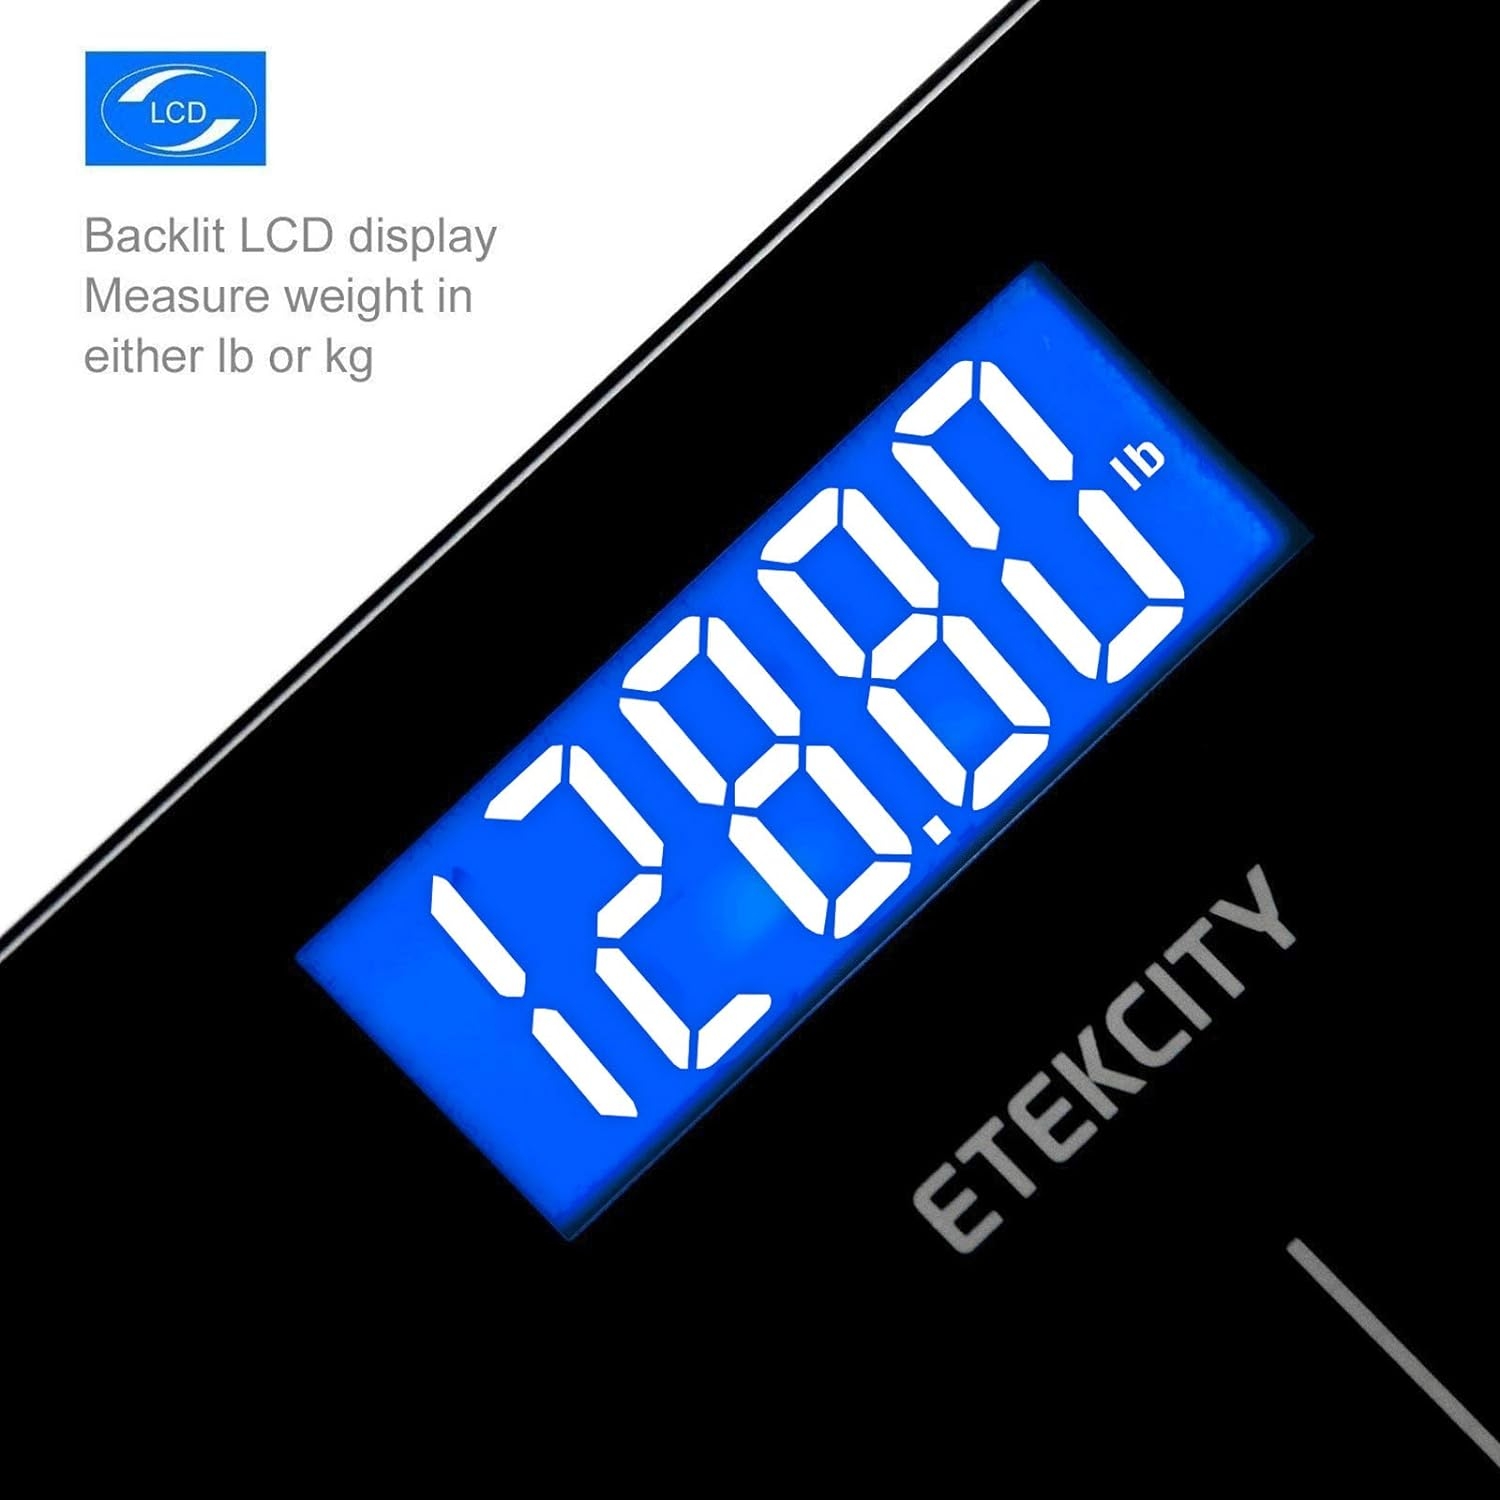 Etekcity Digital Body Weight Bathroom Scale With Step-On Technology, 400 Lb, Body Tape Measure Included, Elegant Black